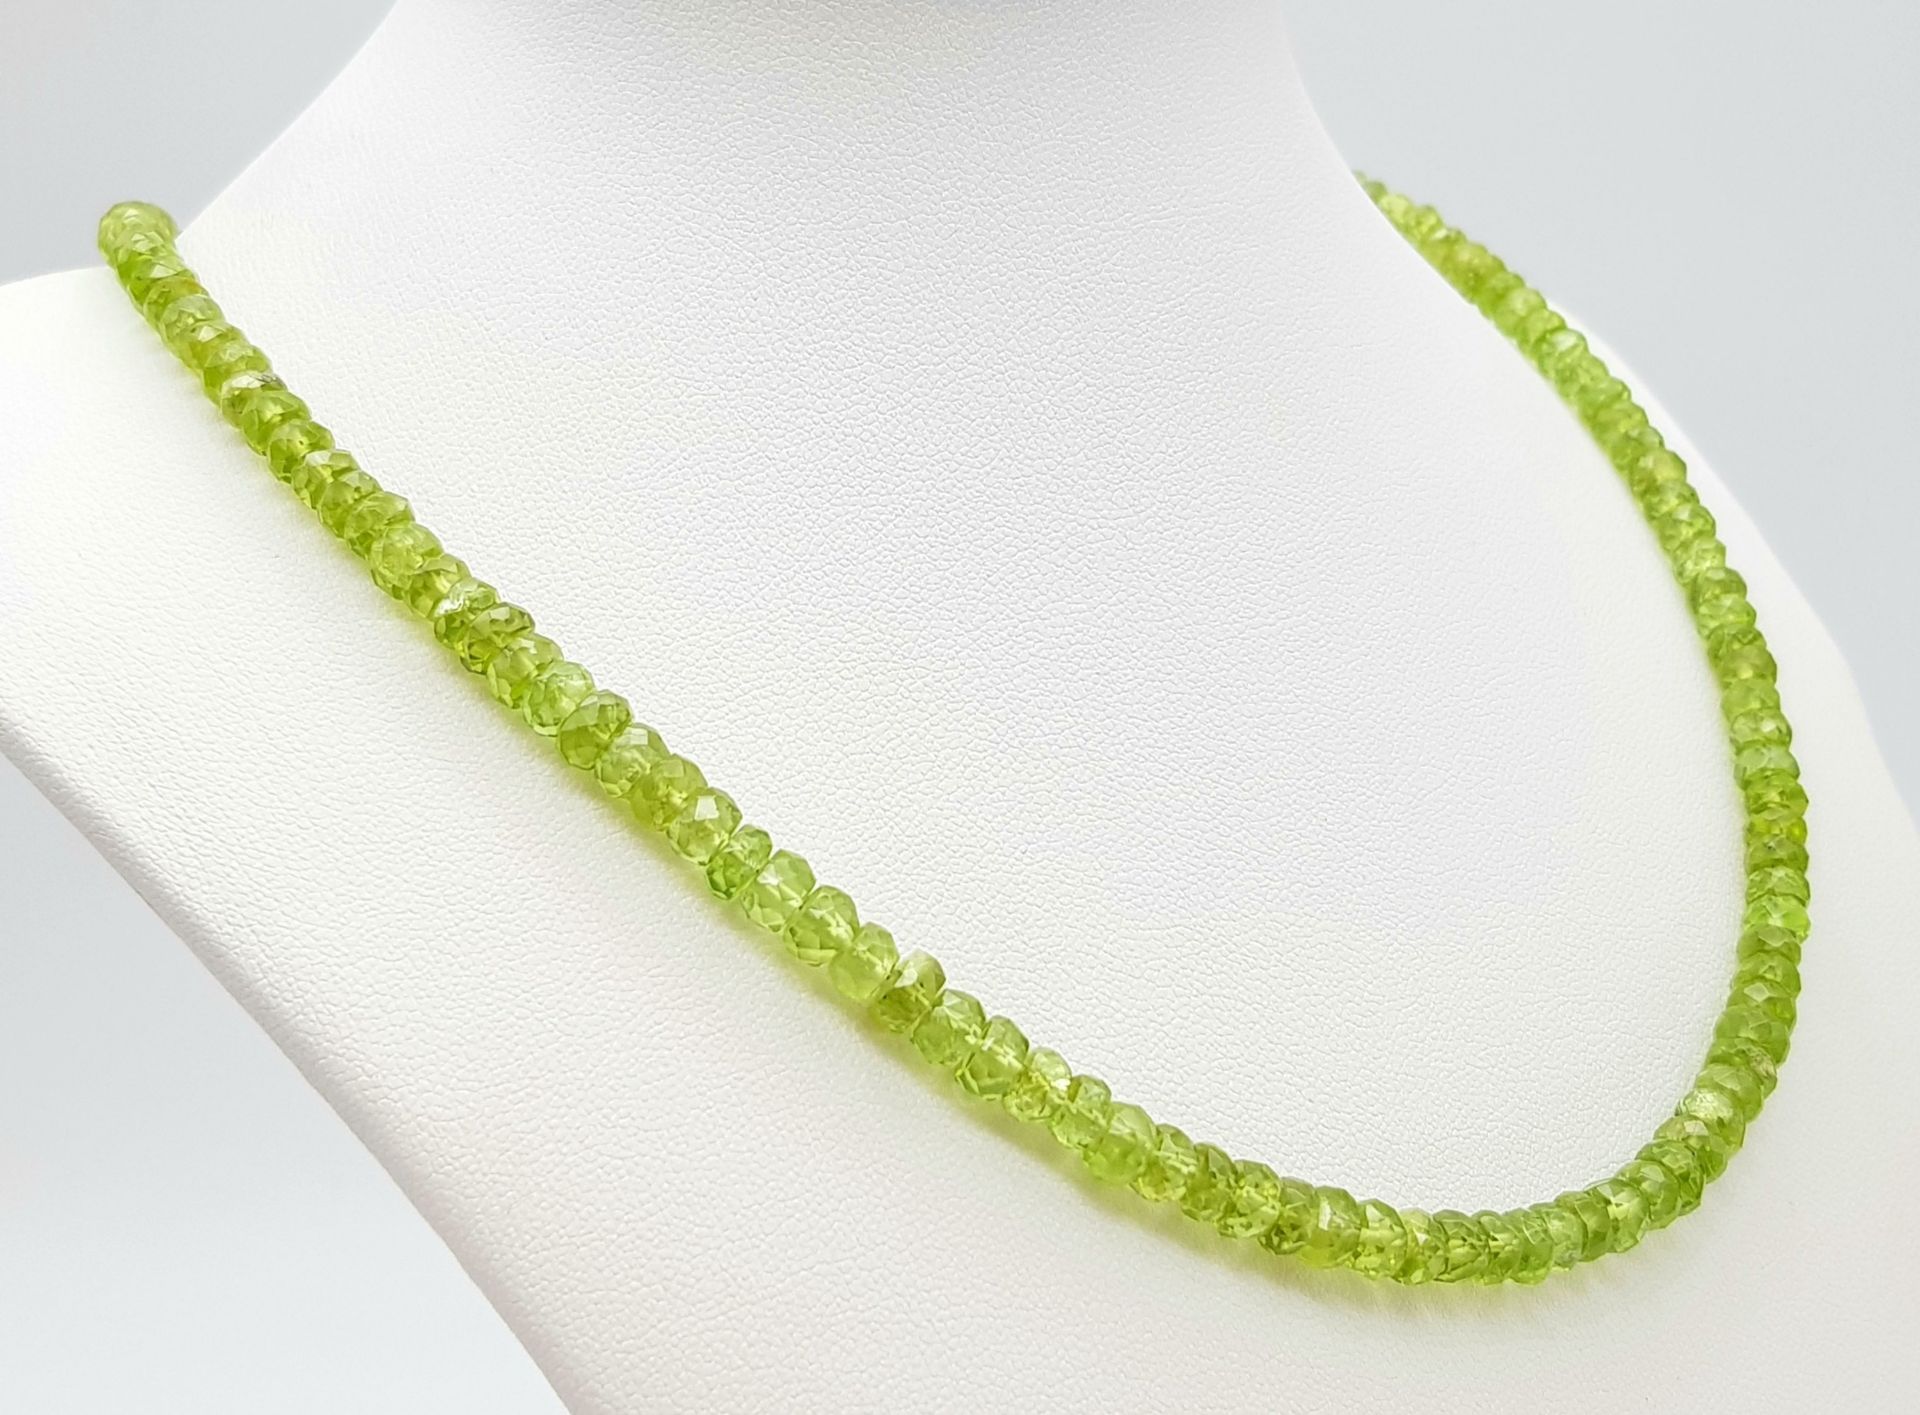 A Peridot Gemstone Tennis Bracelet with a Peridot Rondelle Necklace. Both with silver clasps. - Image 4 of 6